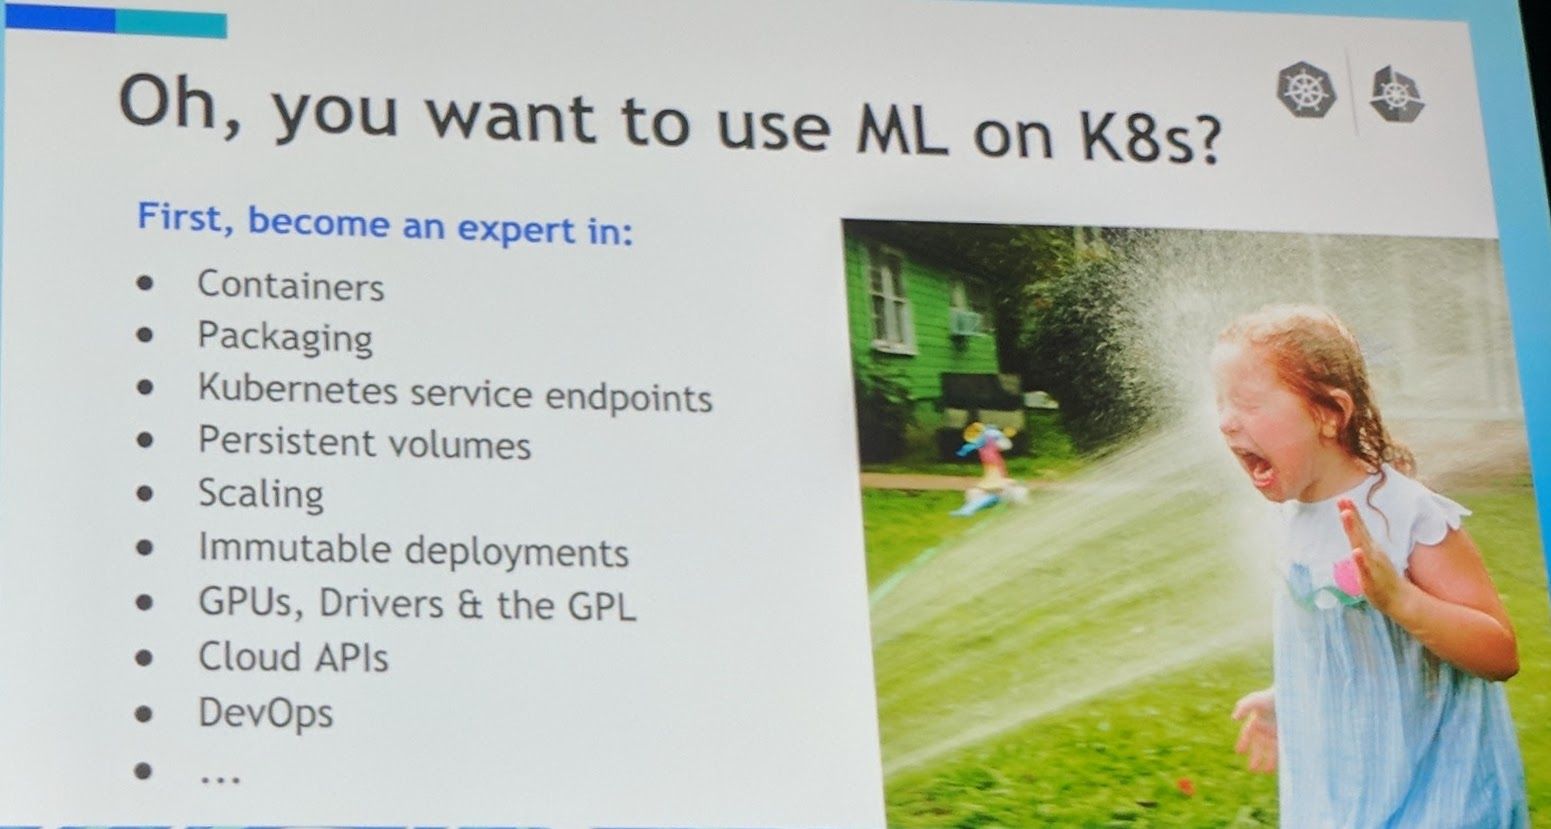 KubeCon - Keynote - Oh, you want to use ML on K8s?